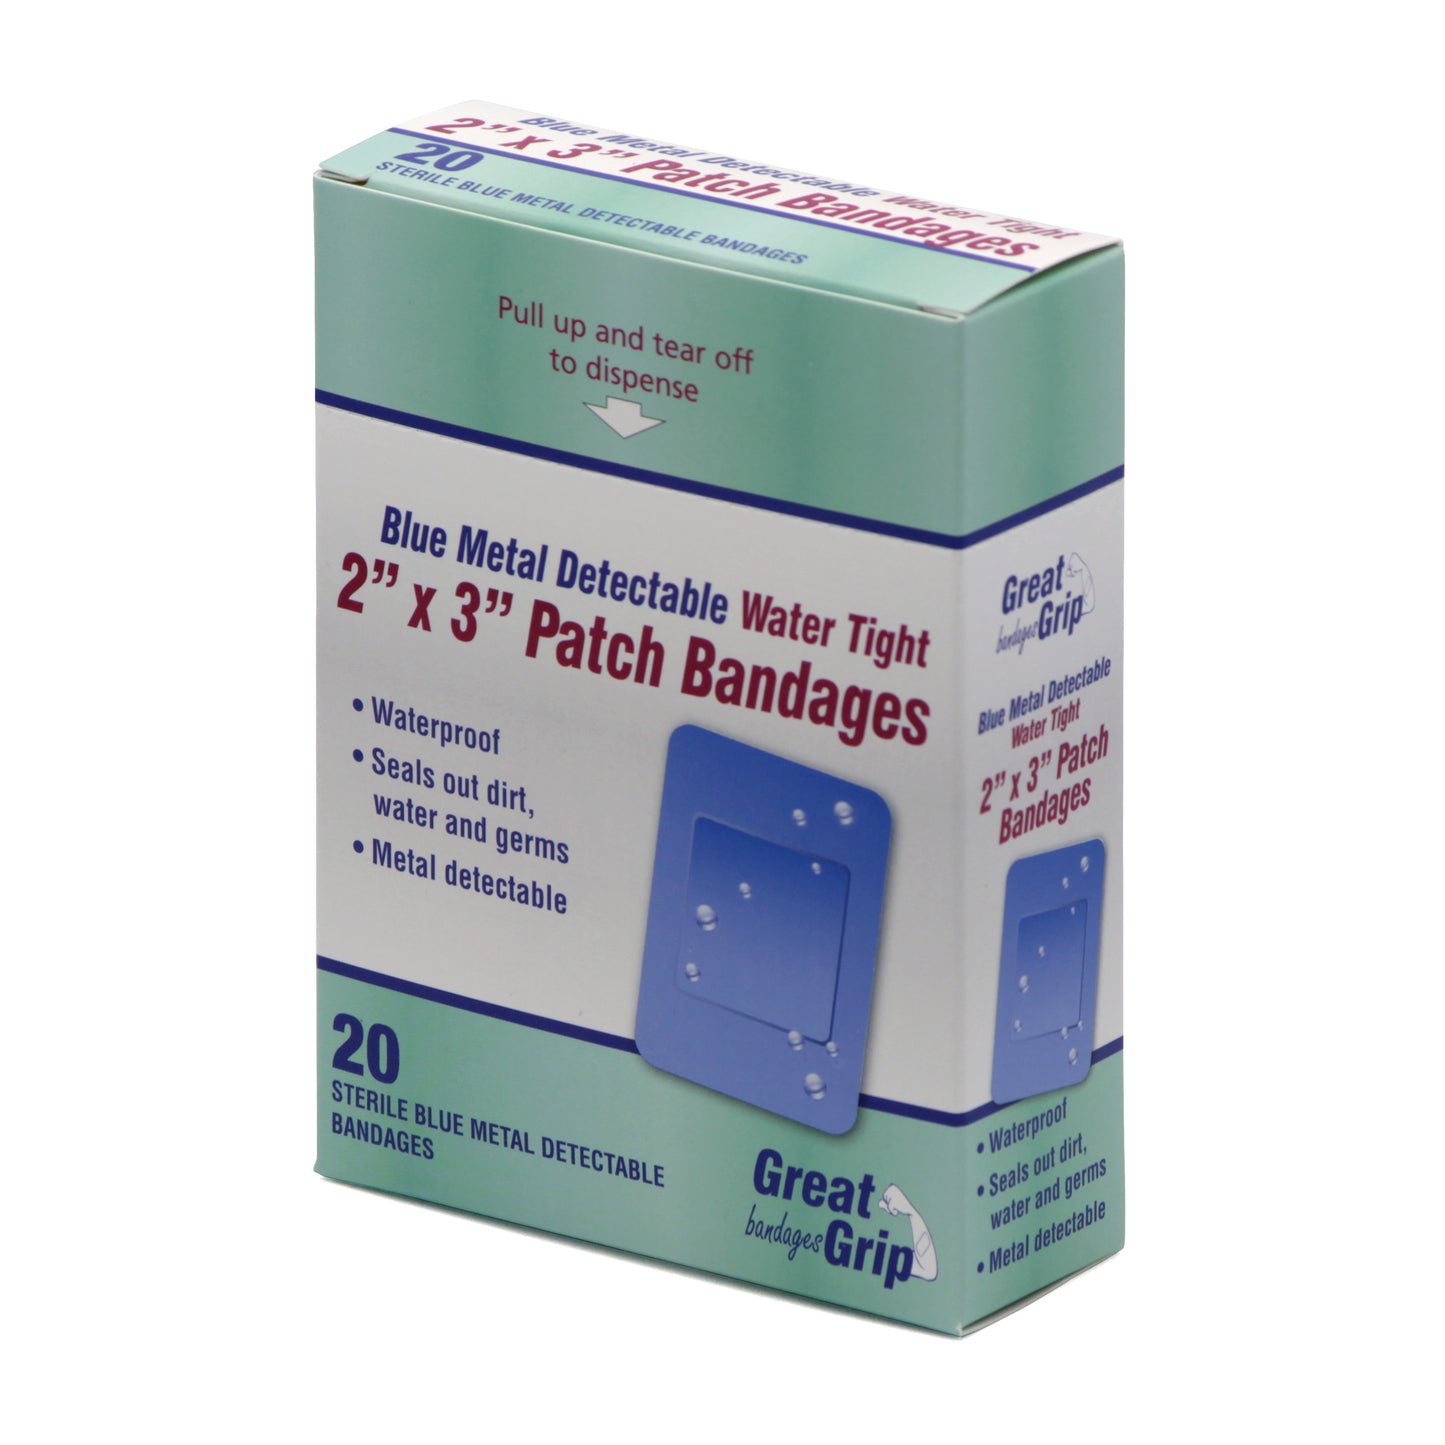 Blue Metal Detectable Water Tight Bandages 2" x 3" Patch